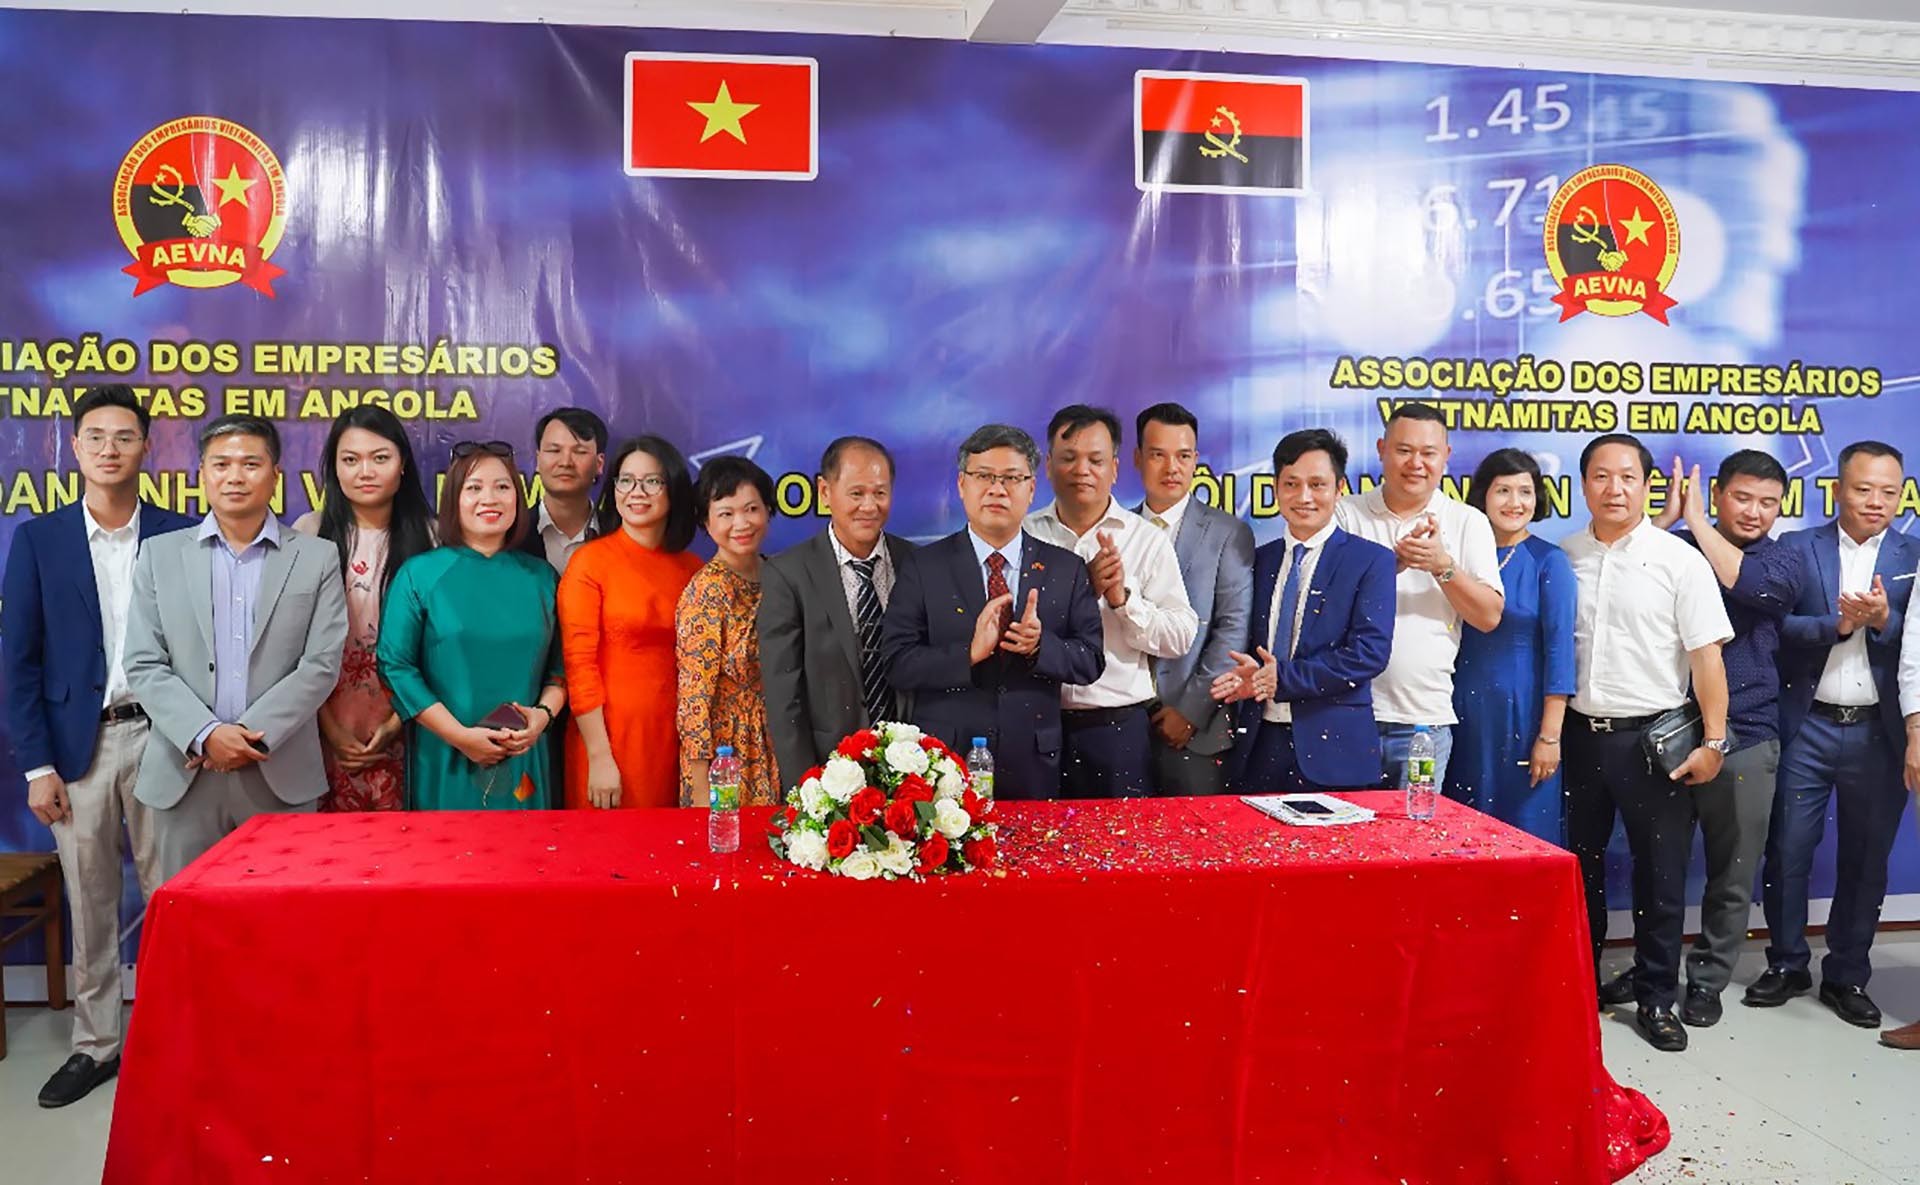 Vietnamese Business Association in Angola officially established after one year of preparation